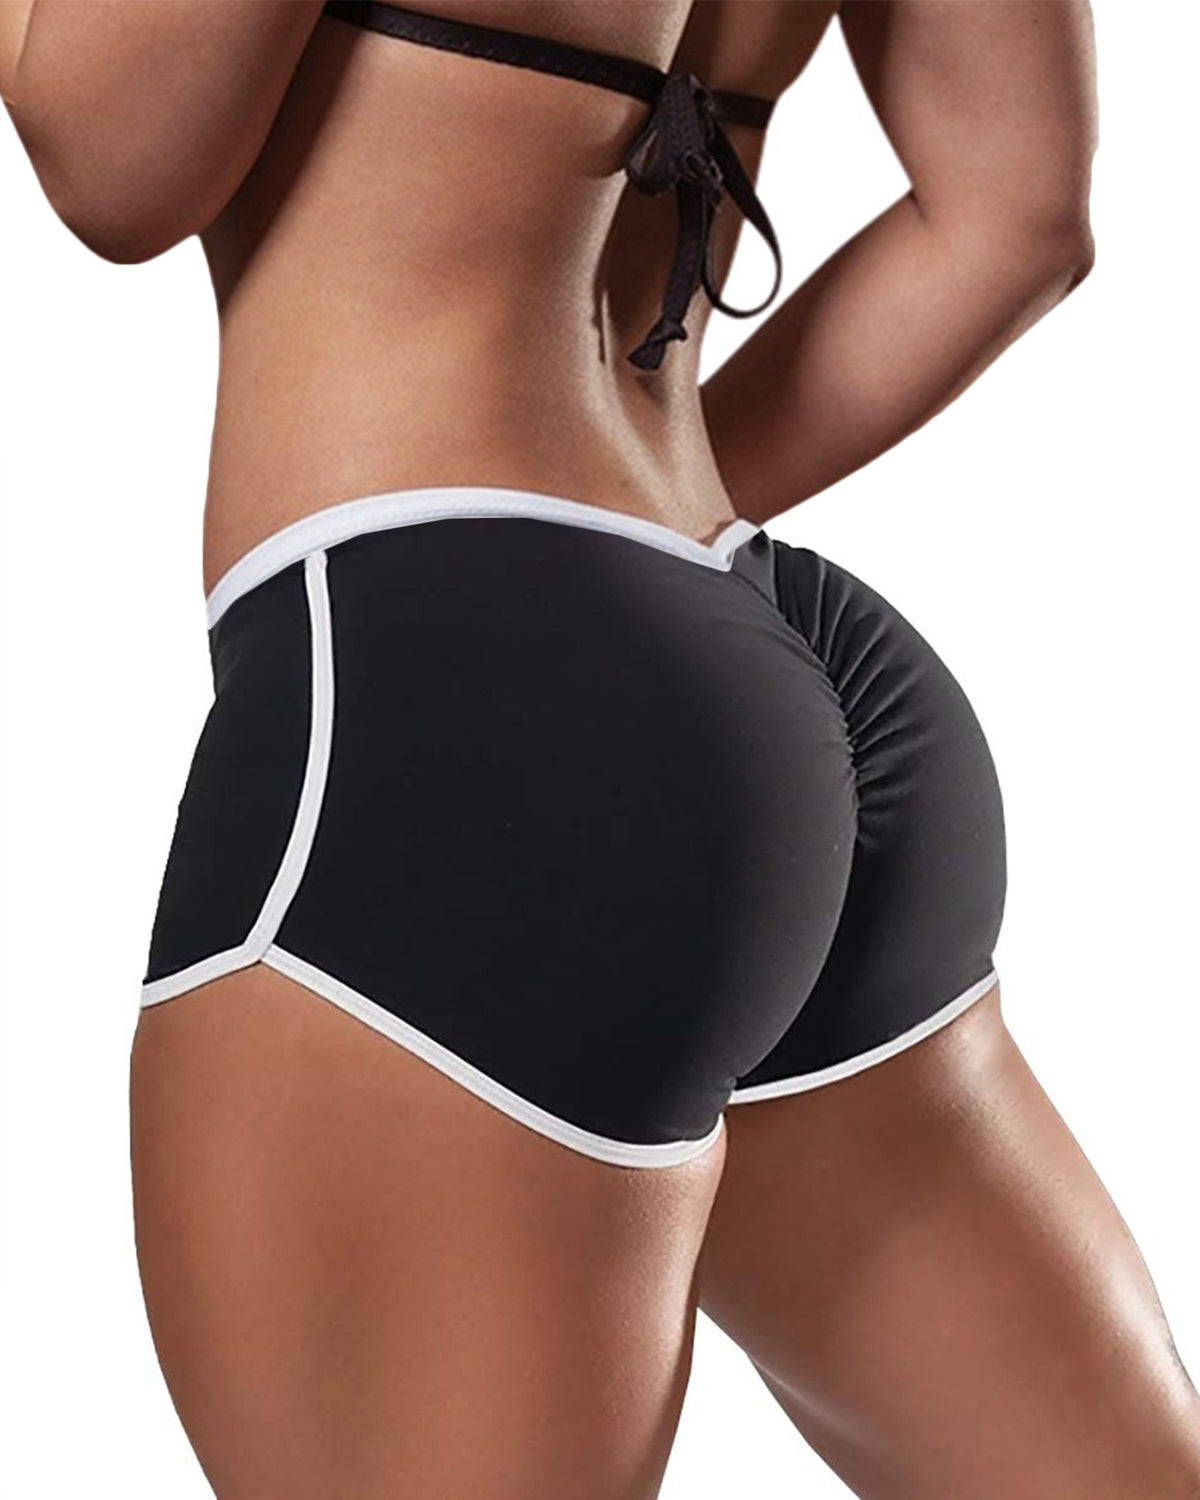 Geumxl New Summer Sport Shorts Women's cycling shorts Elasticated Seamless Fitness Leggings Push Up Gym Training Gym Tights Short